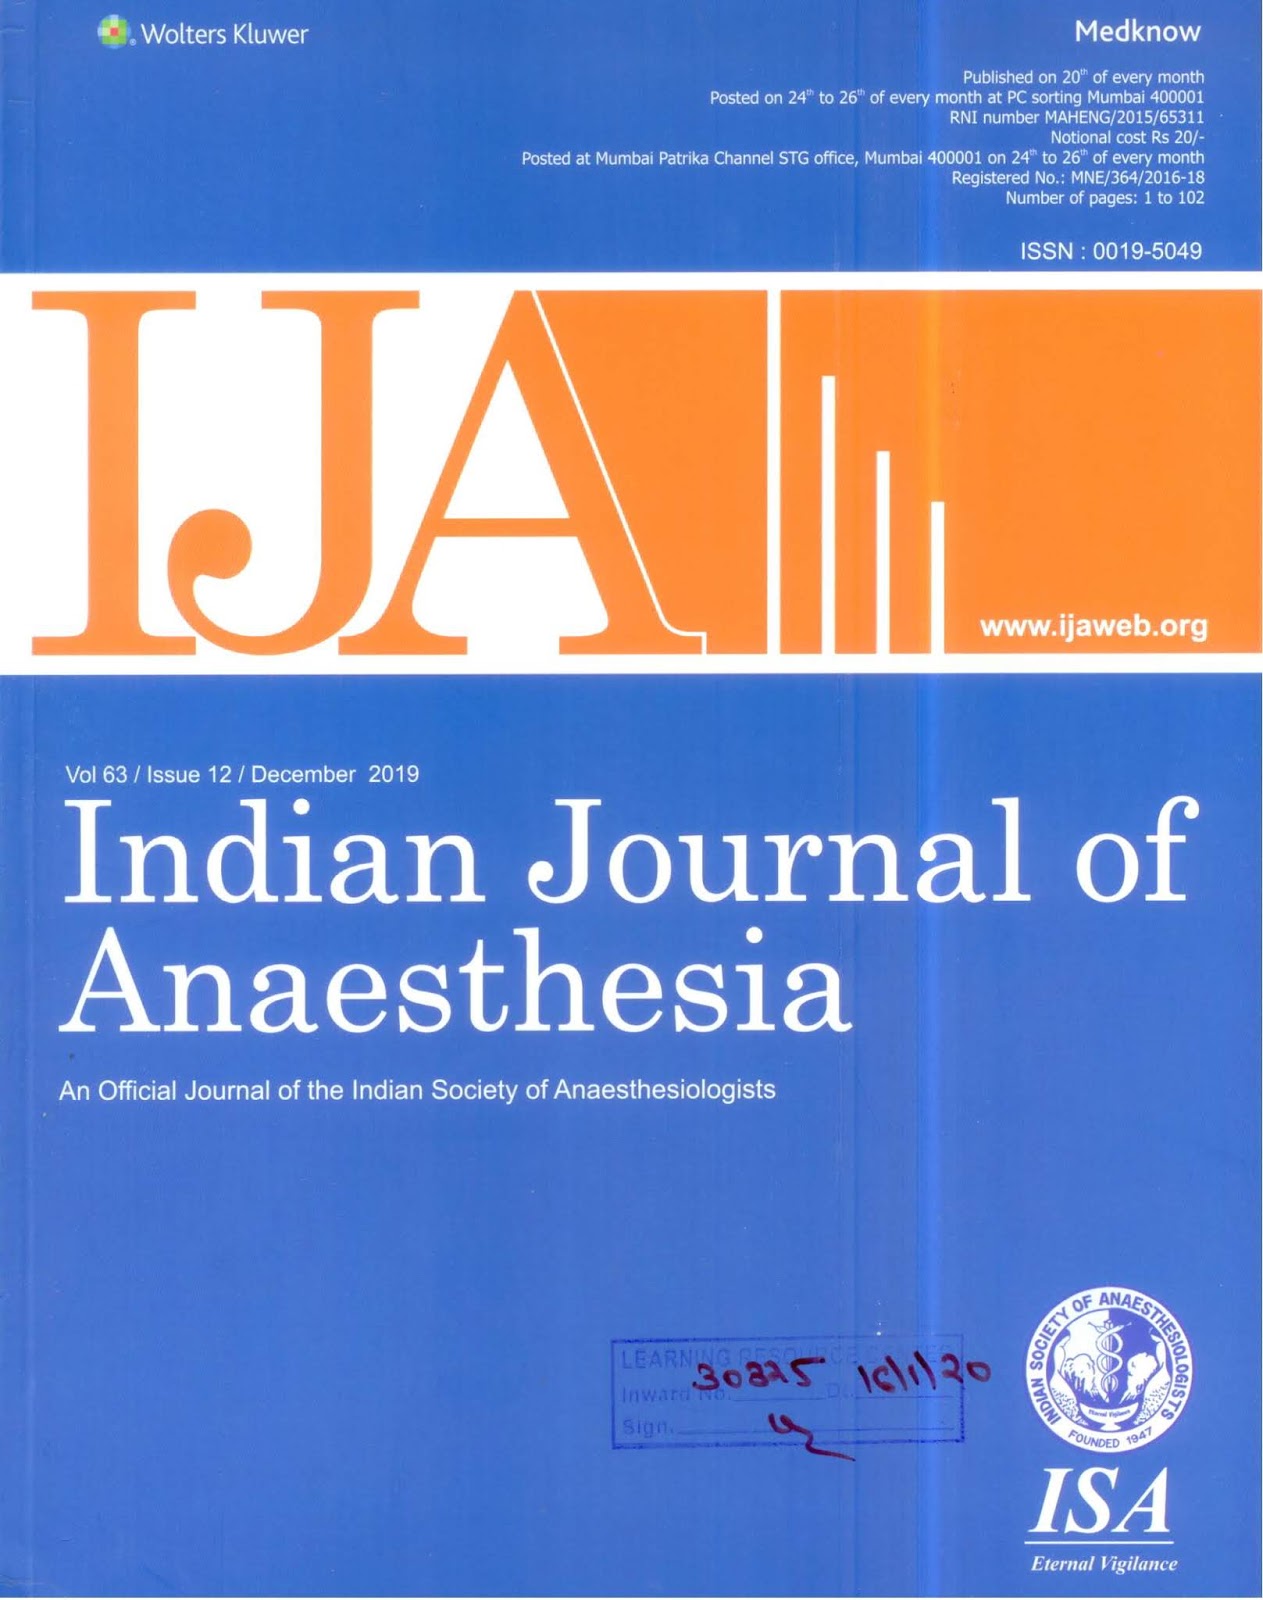 http://www.ijaweb.org/showBackIssue.asp?issn=0019-5049;year=2019;volume=63;issue=12;month=Dec